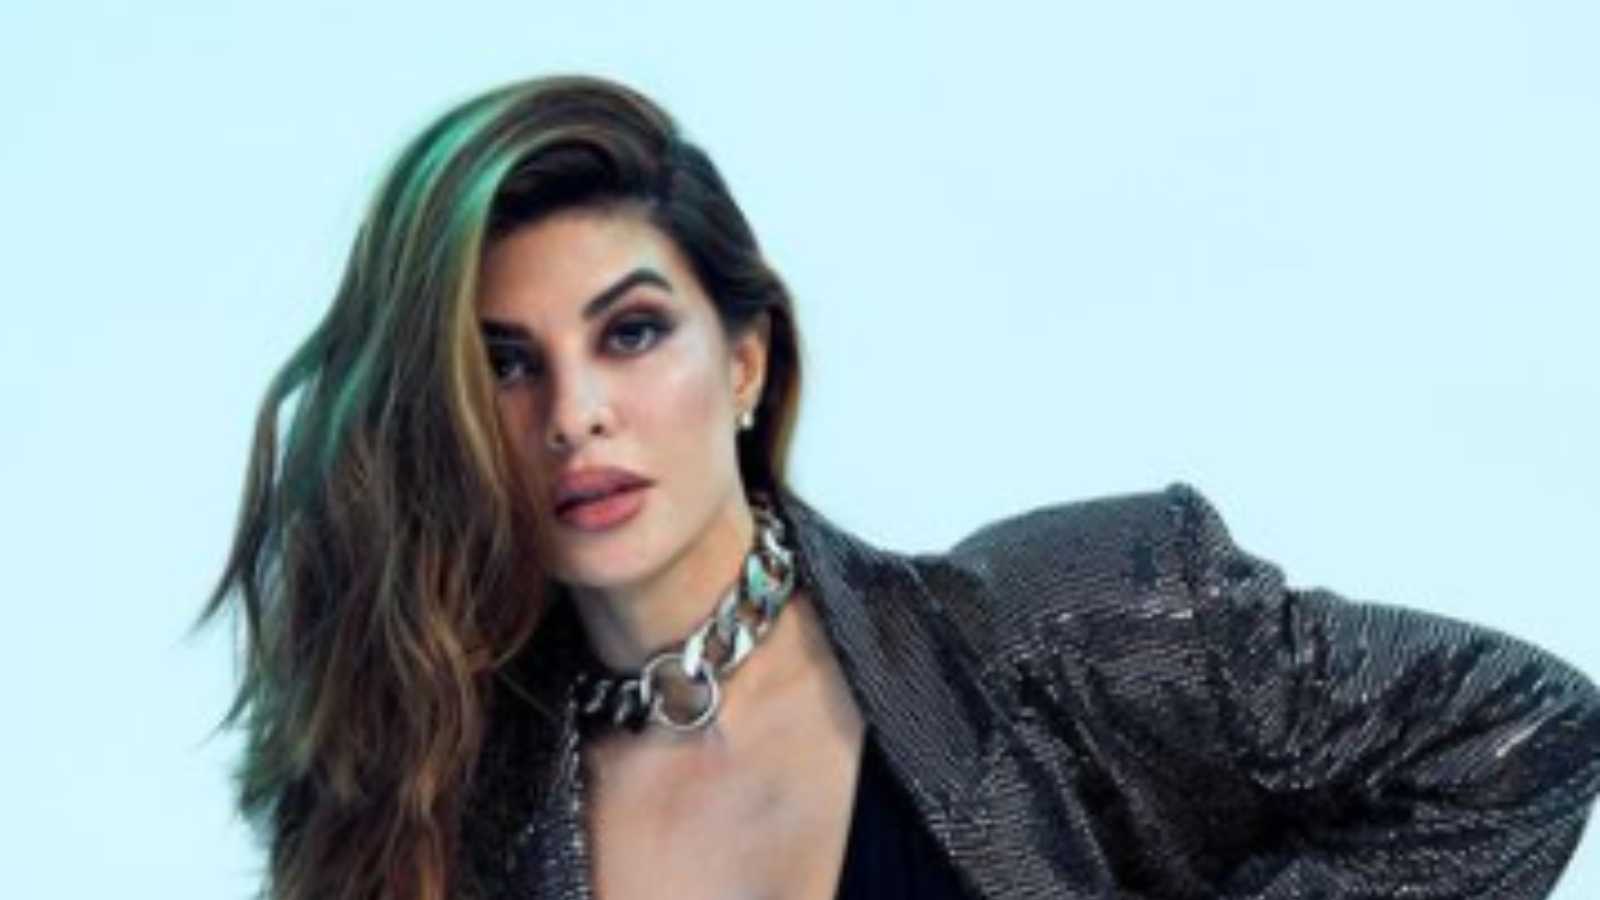 Jacqueline Fernandez's lawyer issues statement post her name appearing on Rs 200 crore extortion case charge sheet, says 'she was a victim'